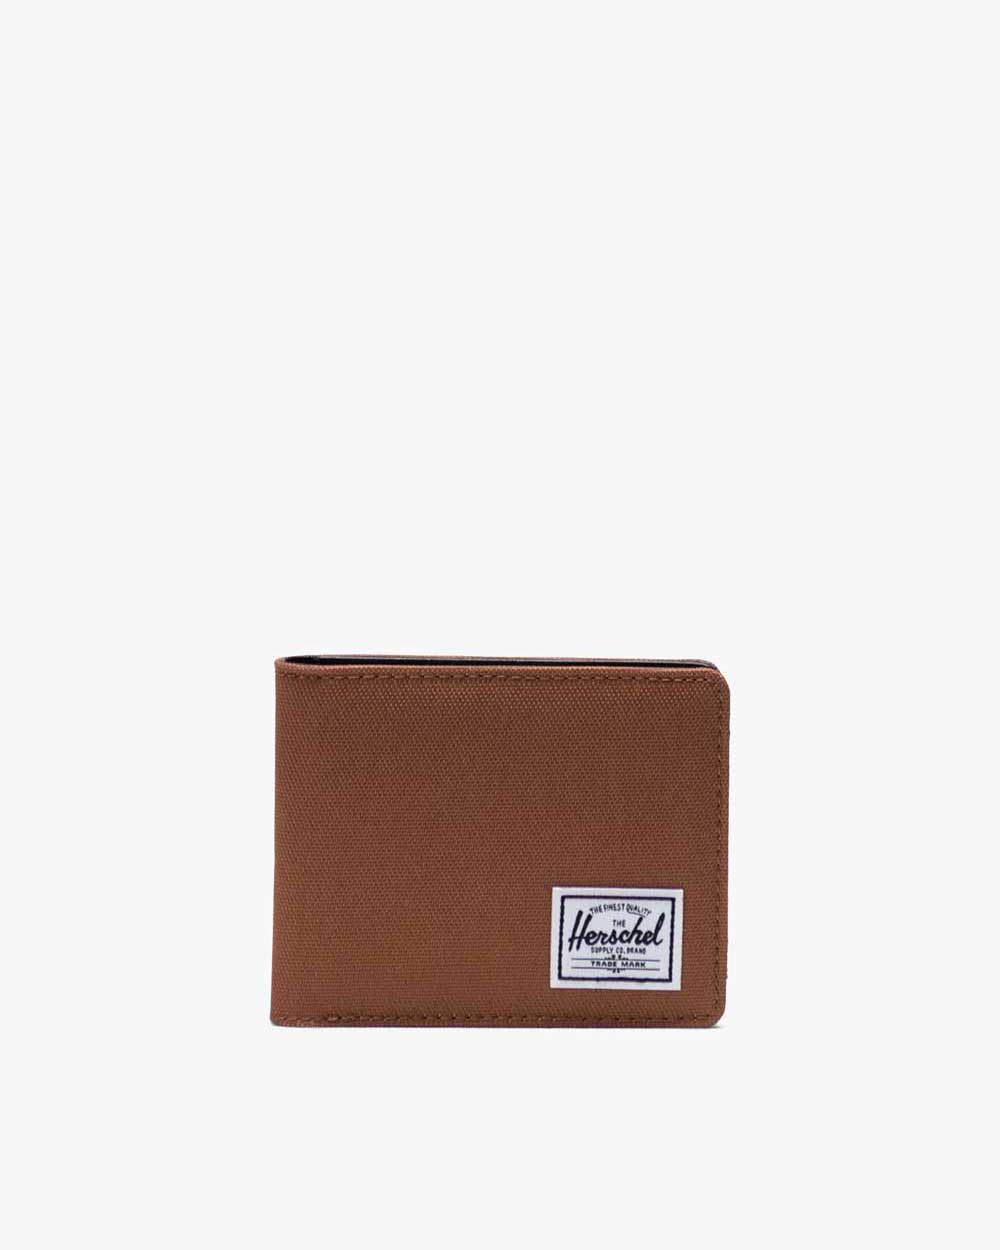 Brown leather Orion Wallet